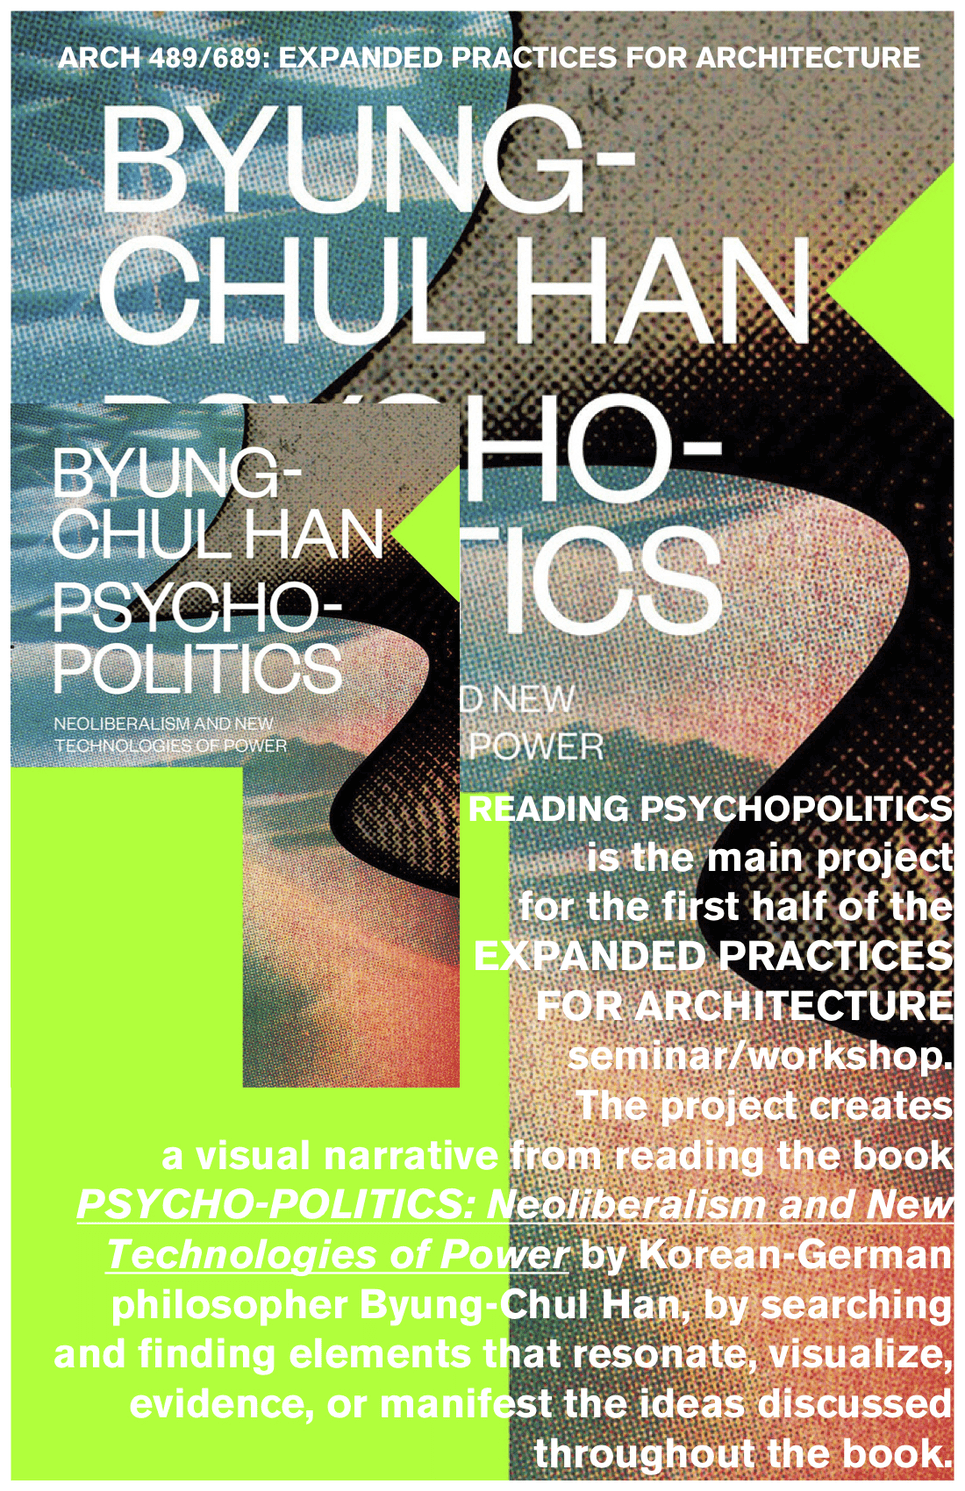 EXPANDED PRACTICES FOR ARCHITECTURE: LOCATING PSYCHOPOLITICS